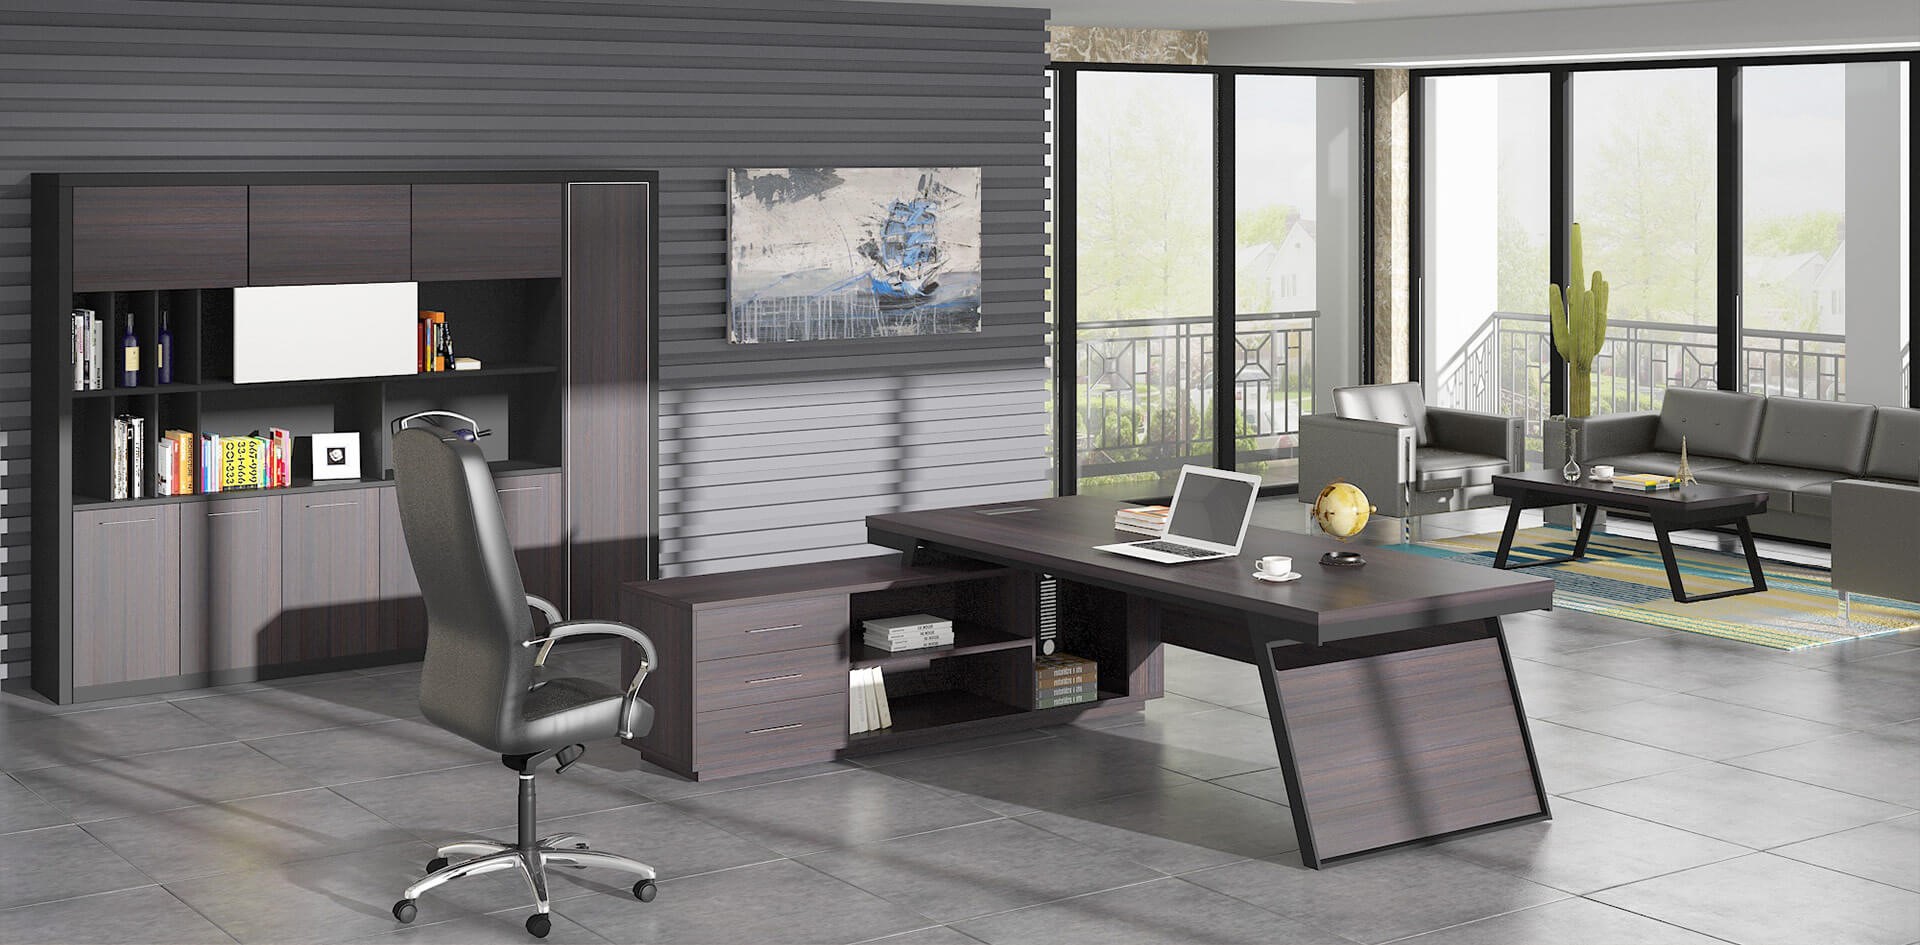 7 Signs It’s Time to Upgrade Your Office Furniture